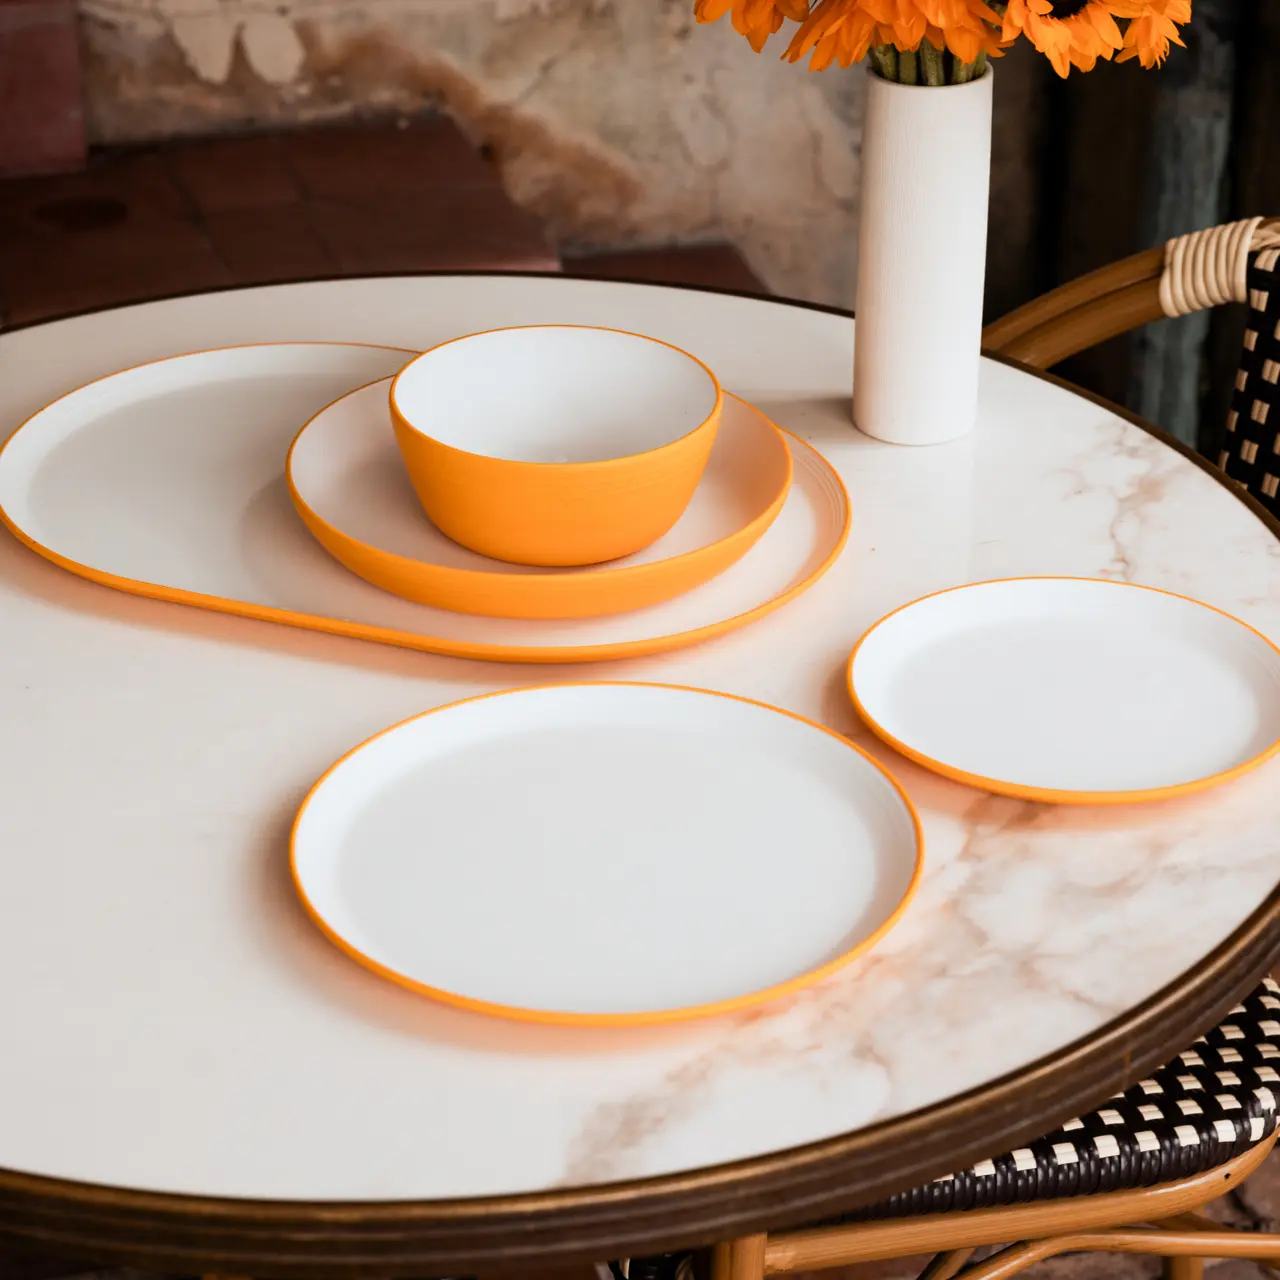 A set of orange-rimmed white dishes arranged neatly on a round marble table.